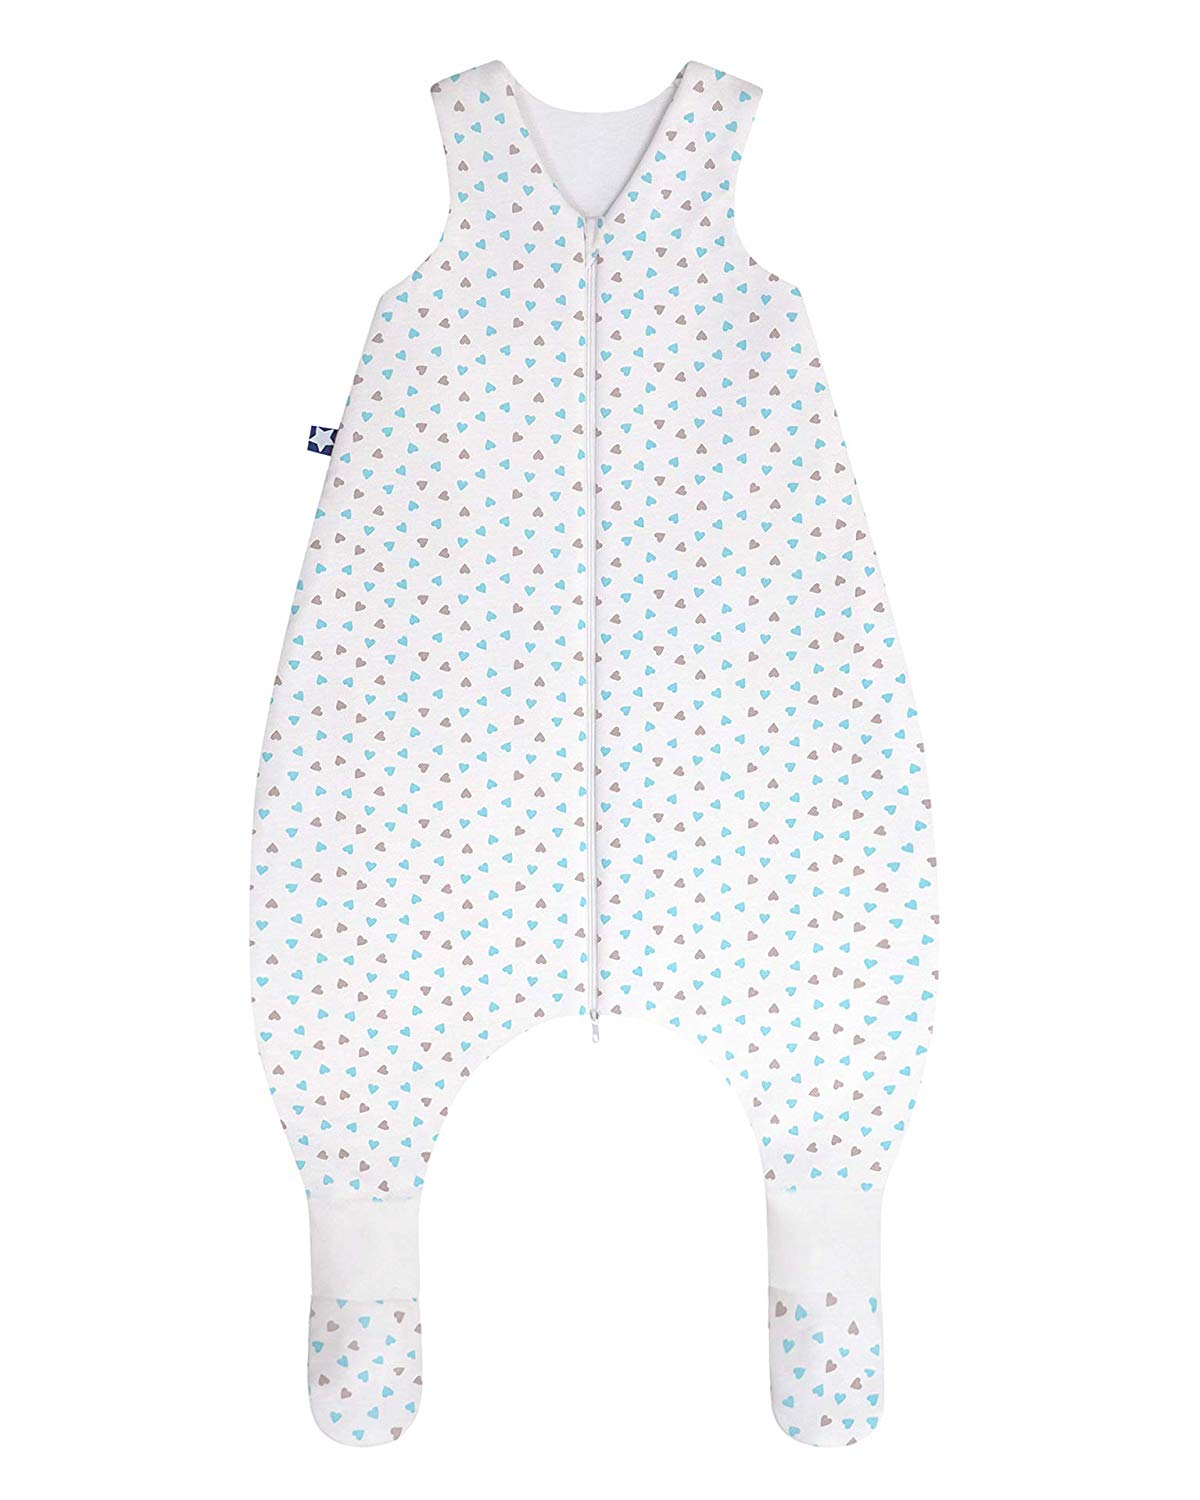 Julius Zöllner Jersey Jumper Plus Sleeping Bag with Legs and Feet, Various Designs and Sizes 10-18 Months / 80 cm